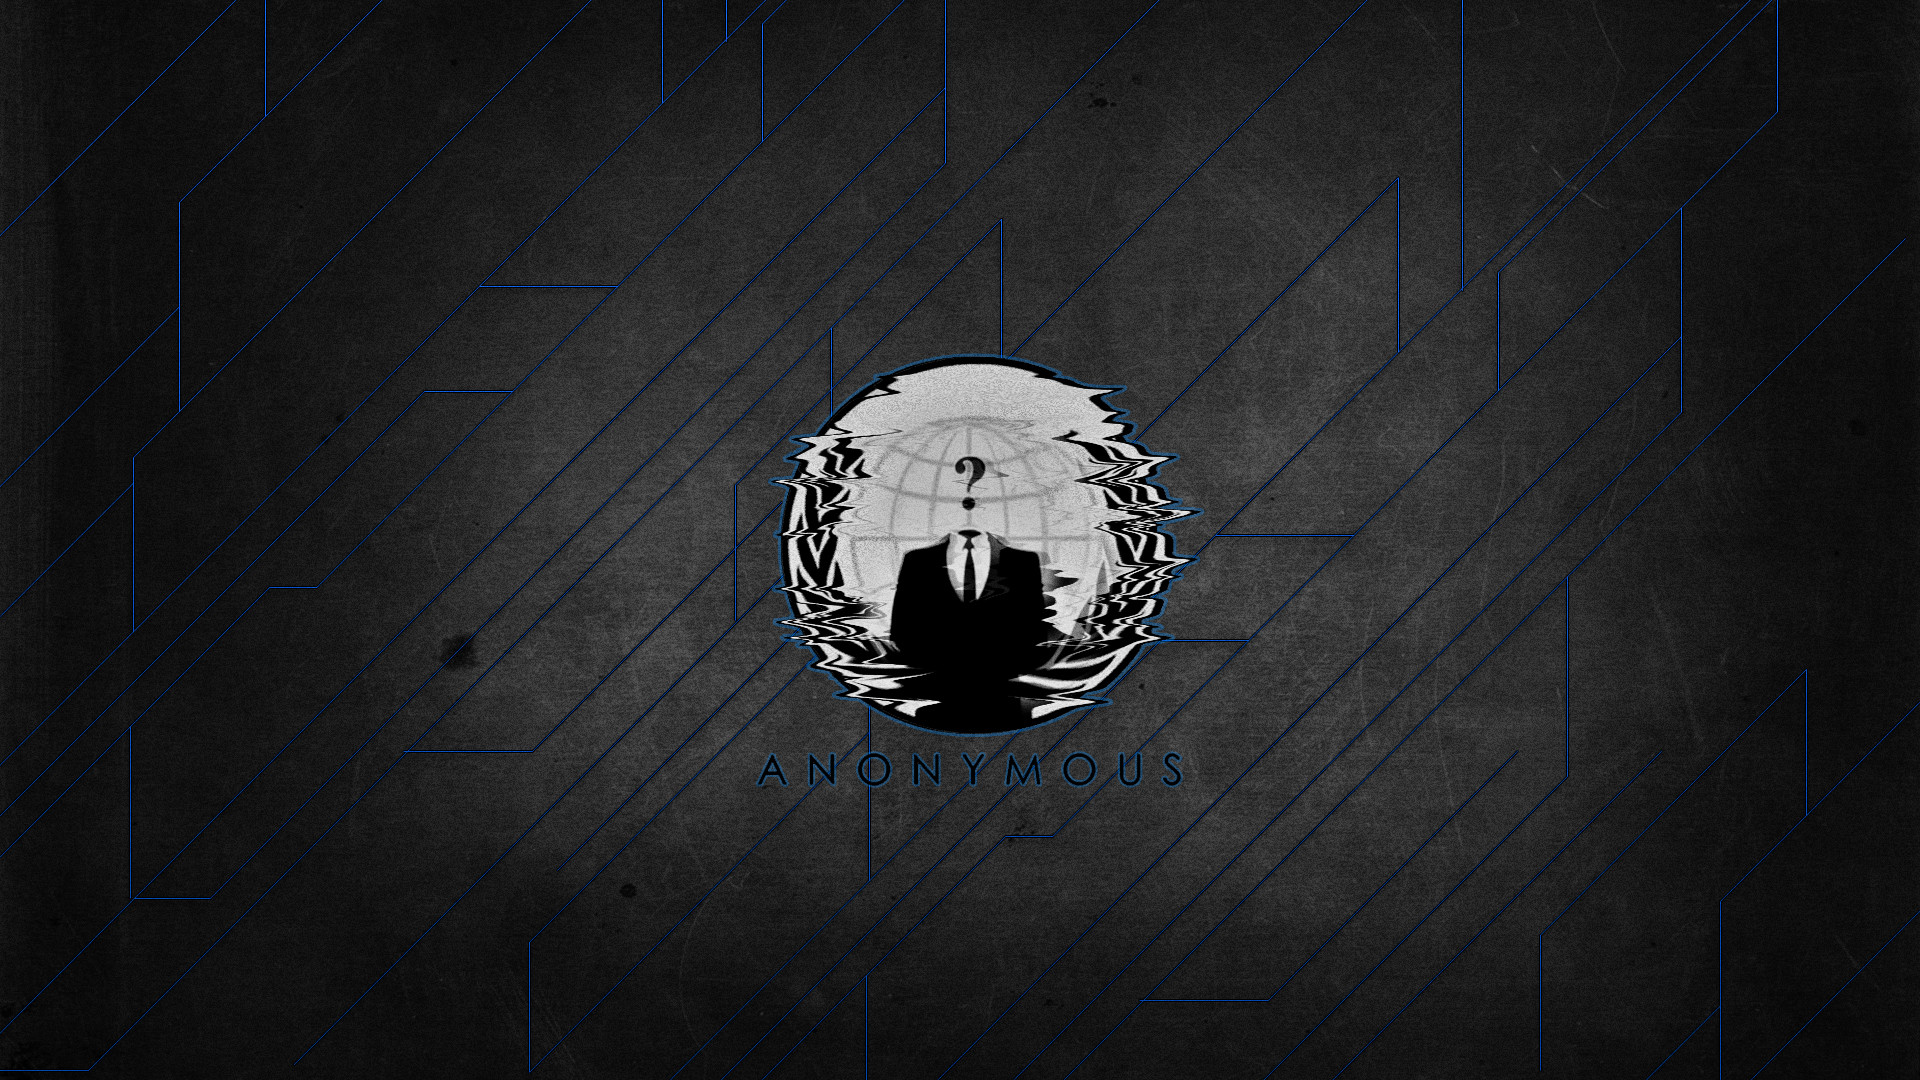 1920x1080 Awesome Anonymous Wallpaper Desktop Computer.